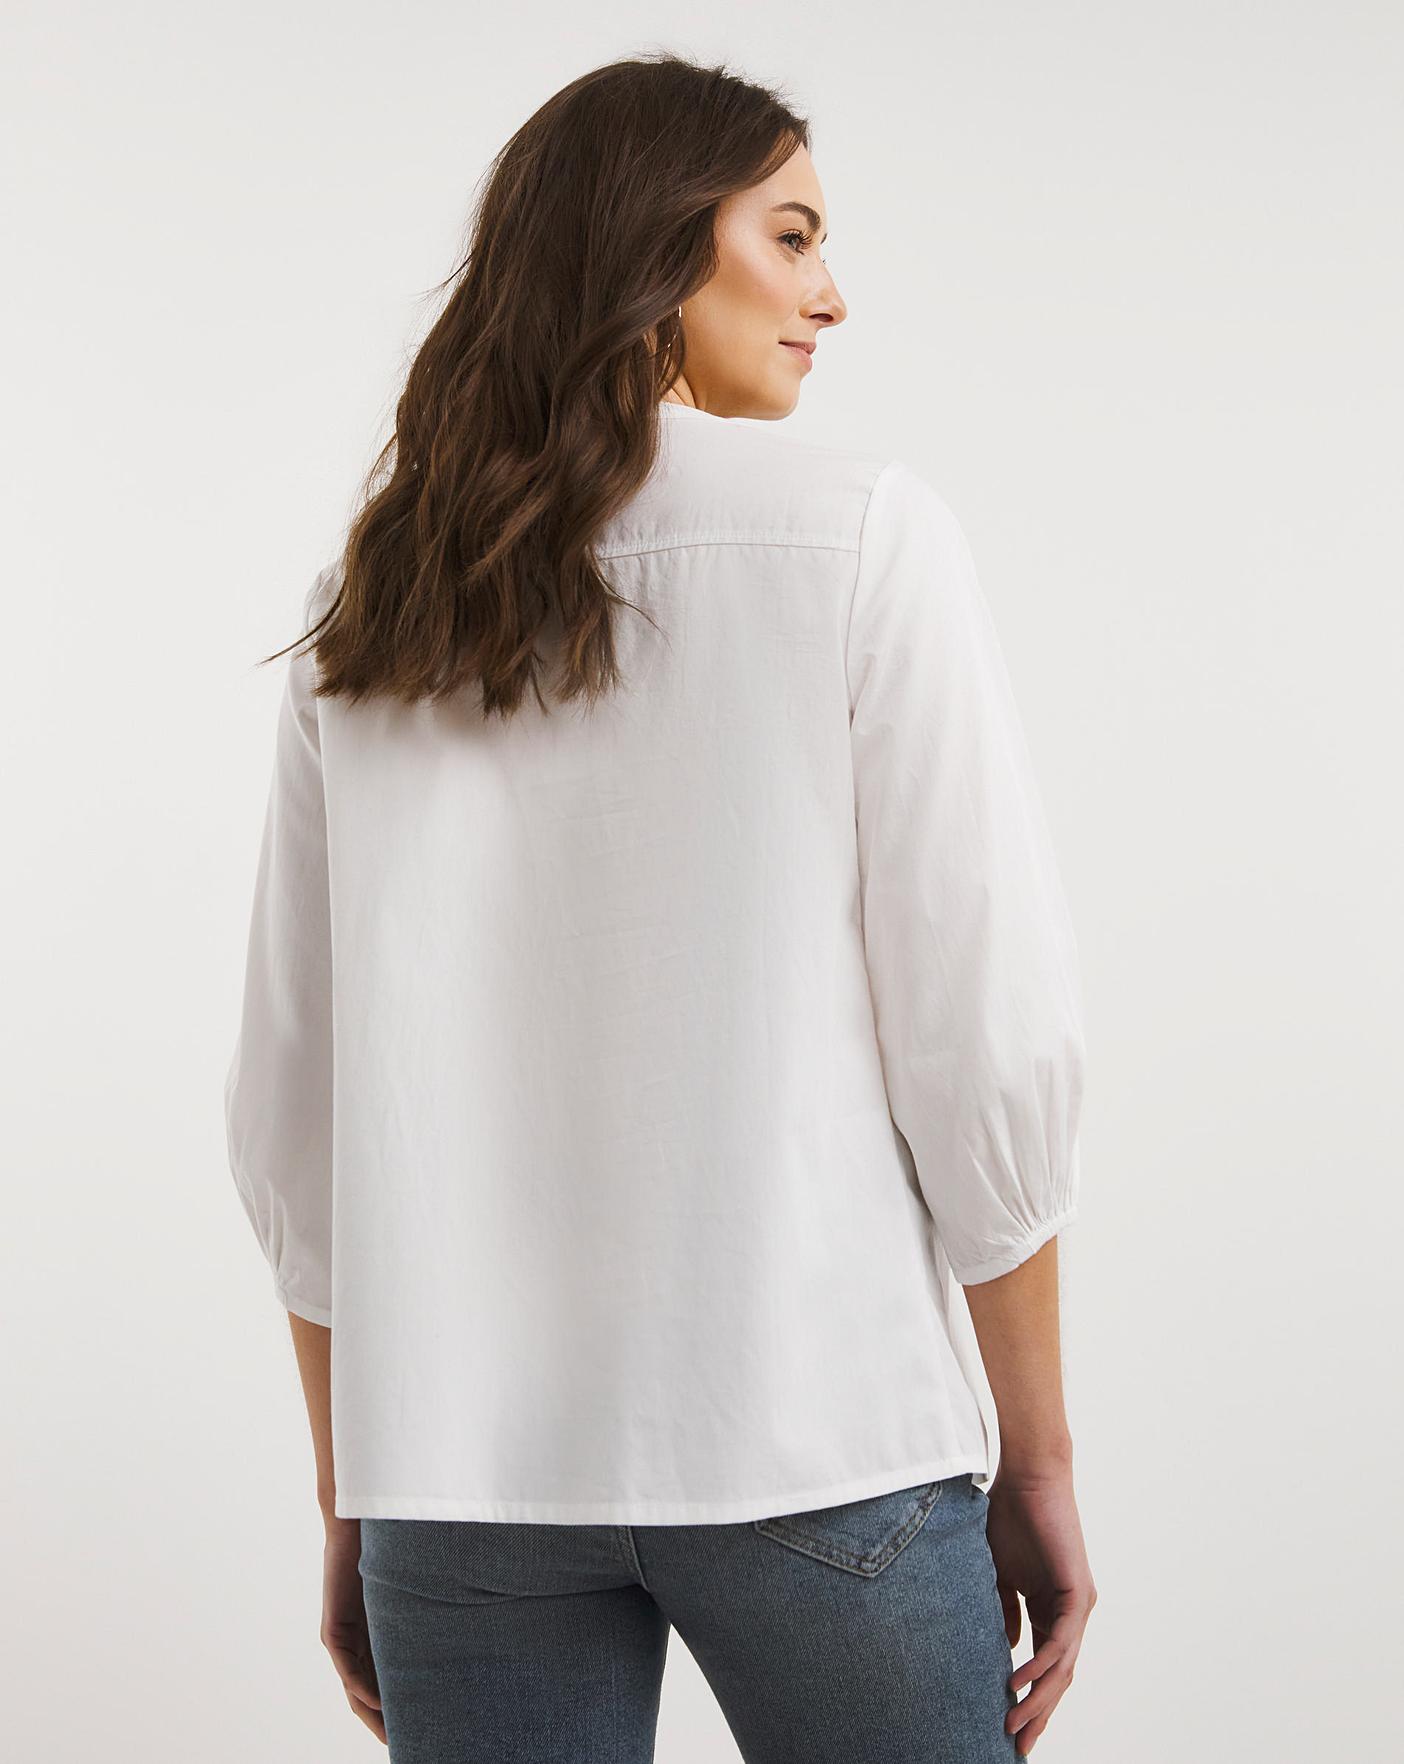 Julipa Embroidered Frill Blouse | J D Williams